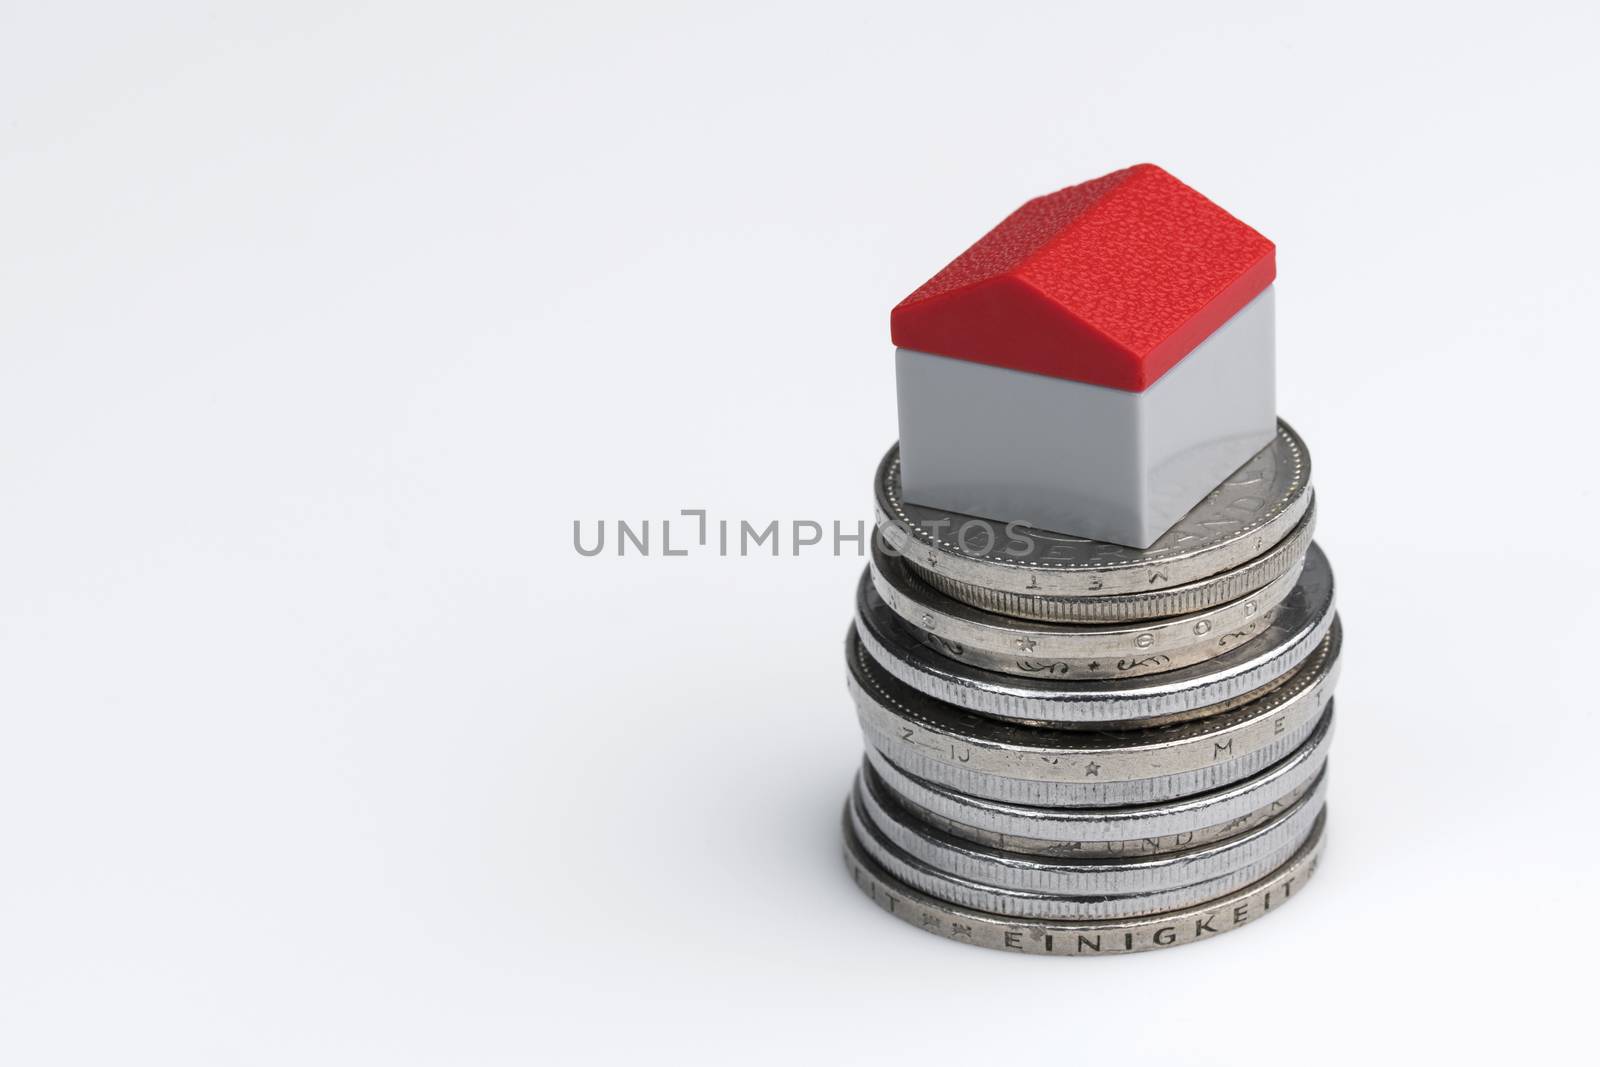 Conceptual visualization of property related financial act by means of coins with plastic miniature cottage for a white background
